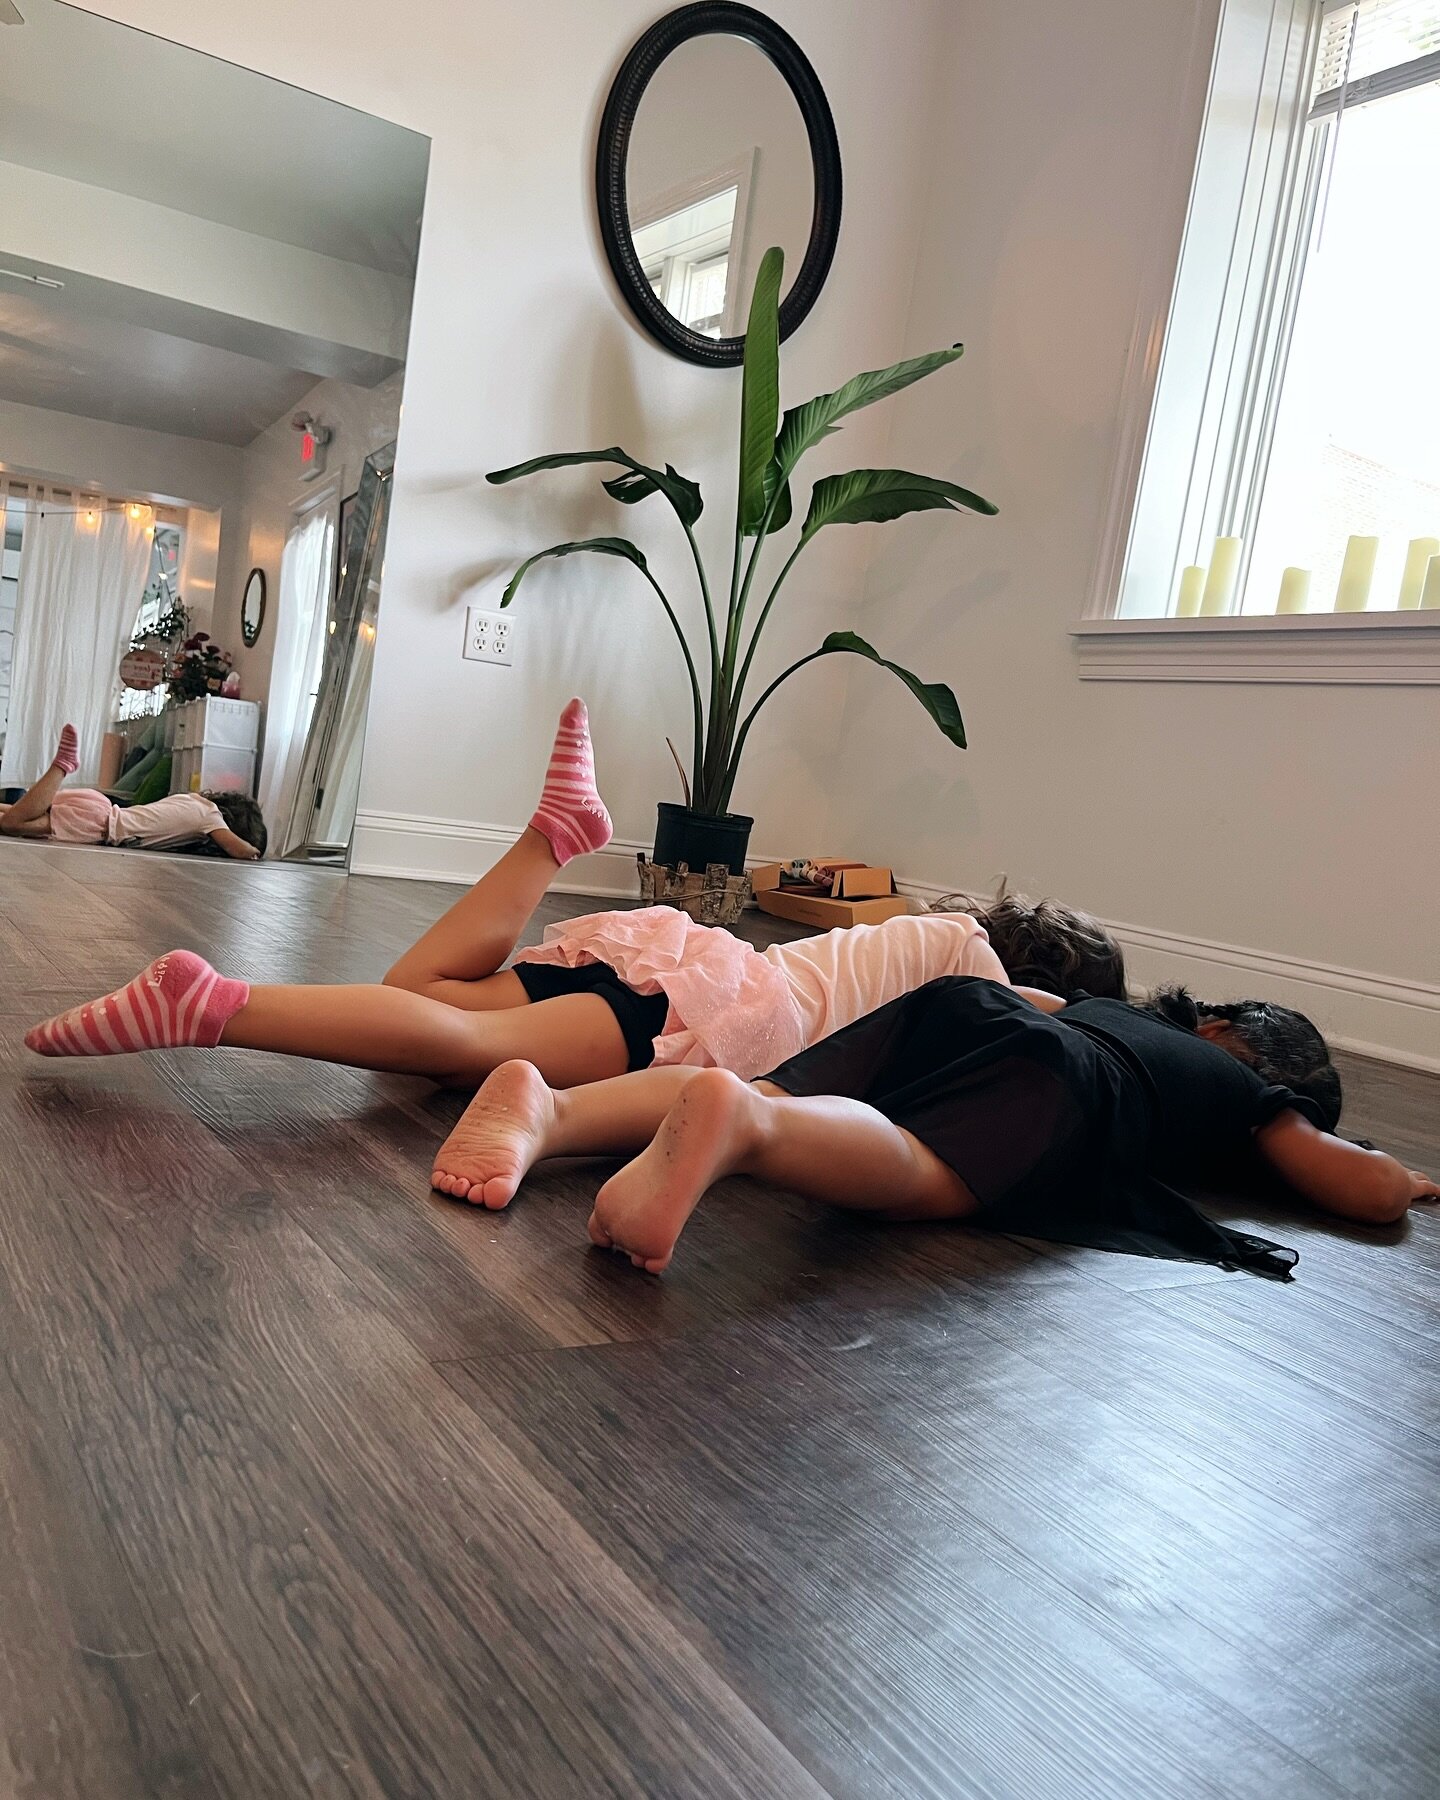 TGIF 😂💕 
Find a buddy to kick off your shoes and relax with! 

Tomorrow&rsquo;s classes:
8am - Coffee Barre 
9:30am - Creative Movement (2-4 years old)
10:30am - Ballet Intro (5-7 years old)

Sign up in our bio or walk ins welcome! ✨

#ballet #baby